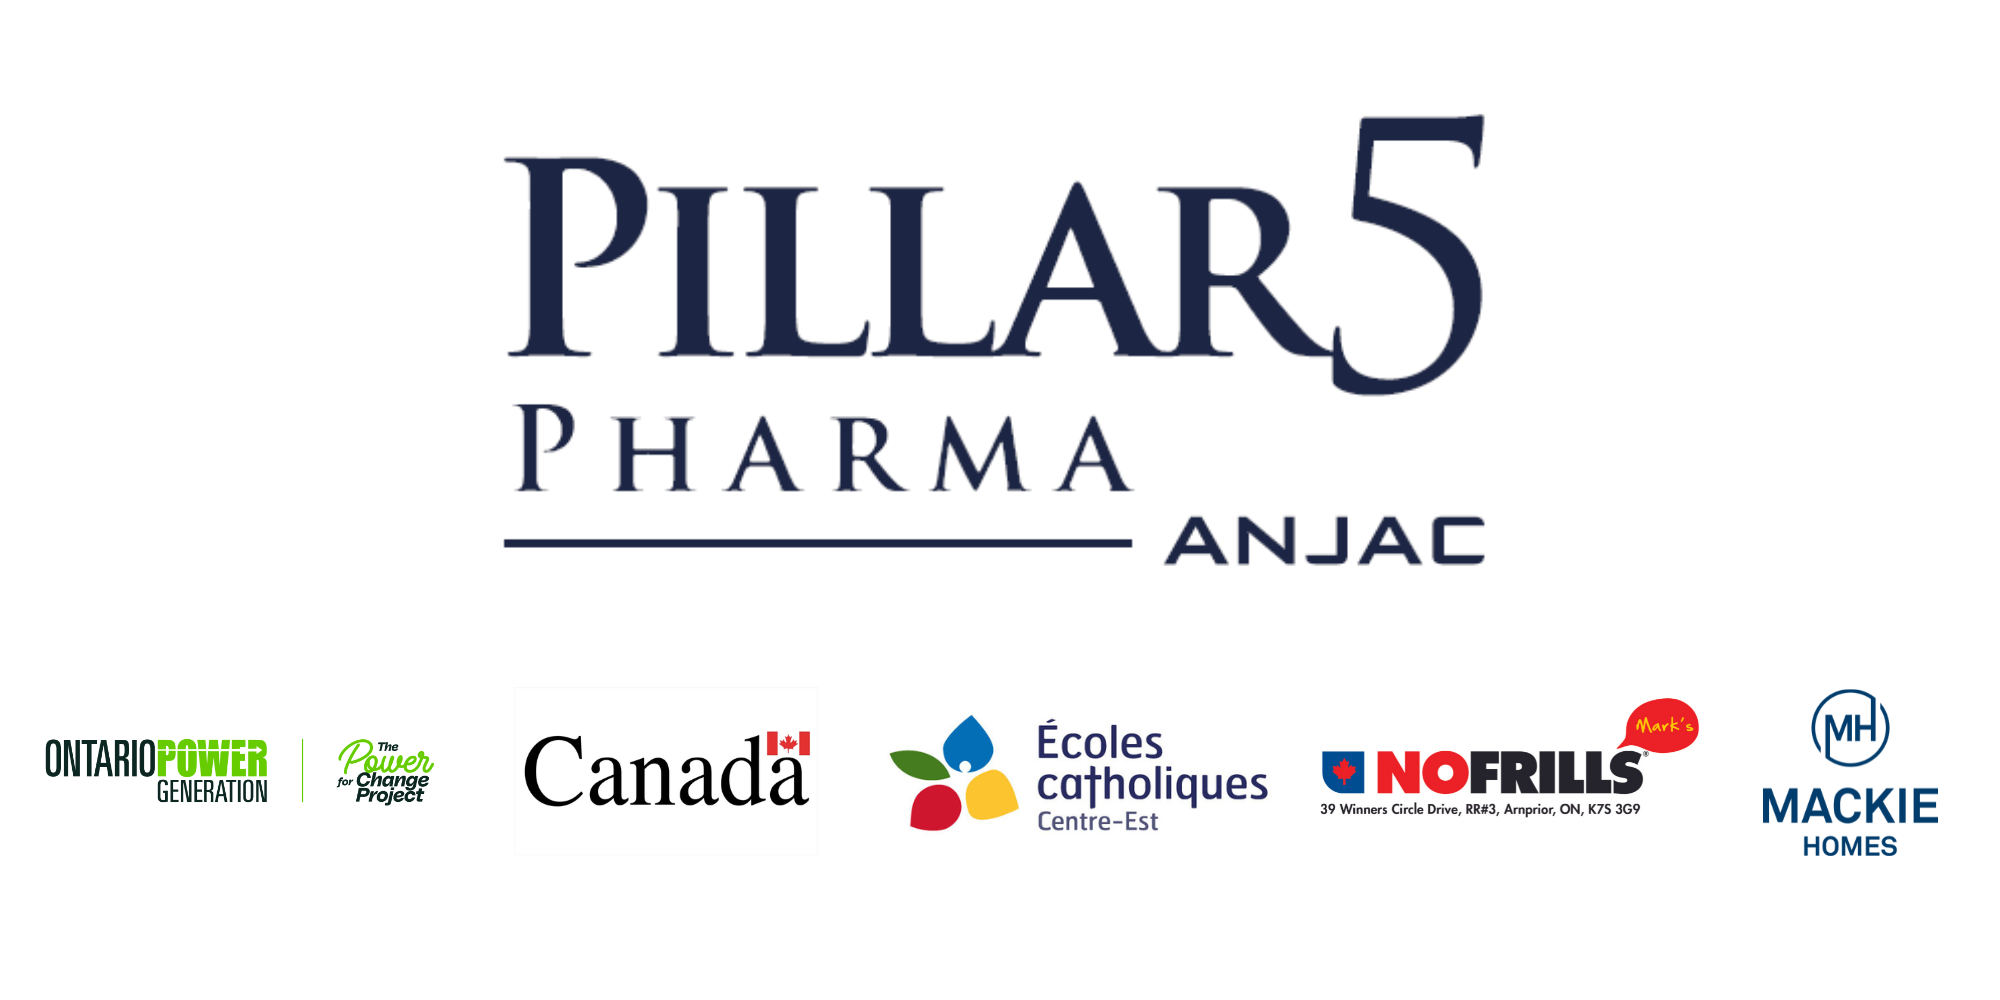 Sponsor logos of Pillar 5, CECCE, Canadian Government, Ontario Power Generation, Mackie Homes, and No Frills.